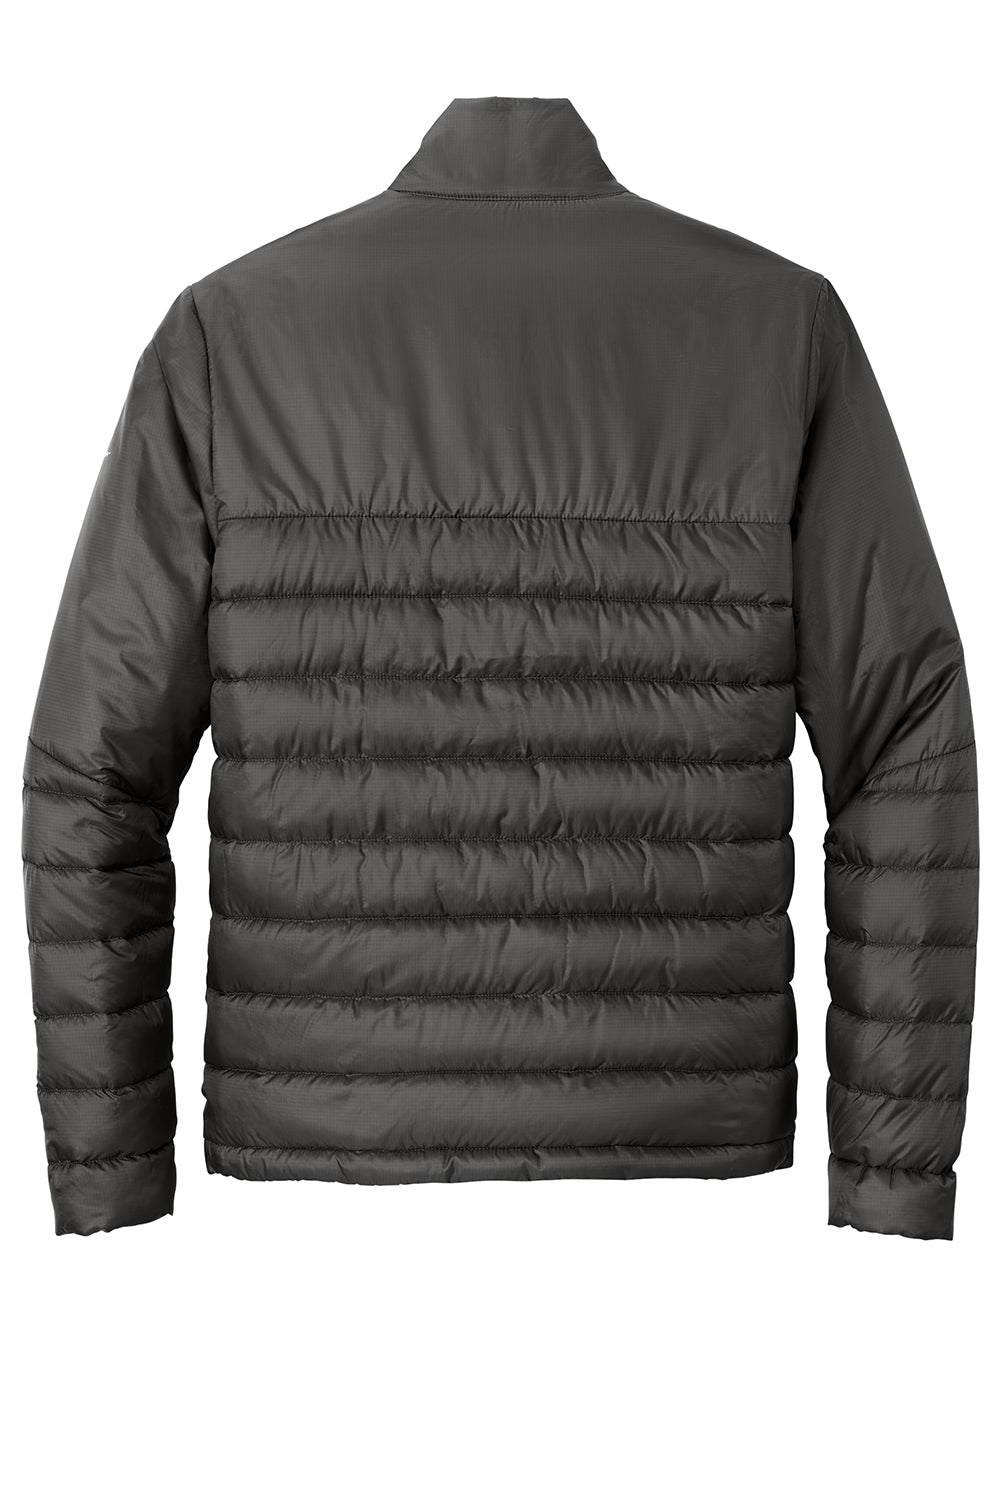 Eddie Bauer EB510 Mens Water Resistant Quilted Full Zip Jacket Iron Gate Grey Flat Back